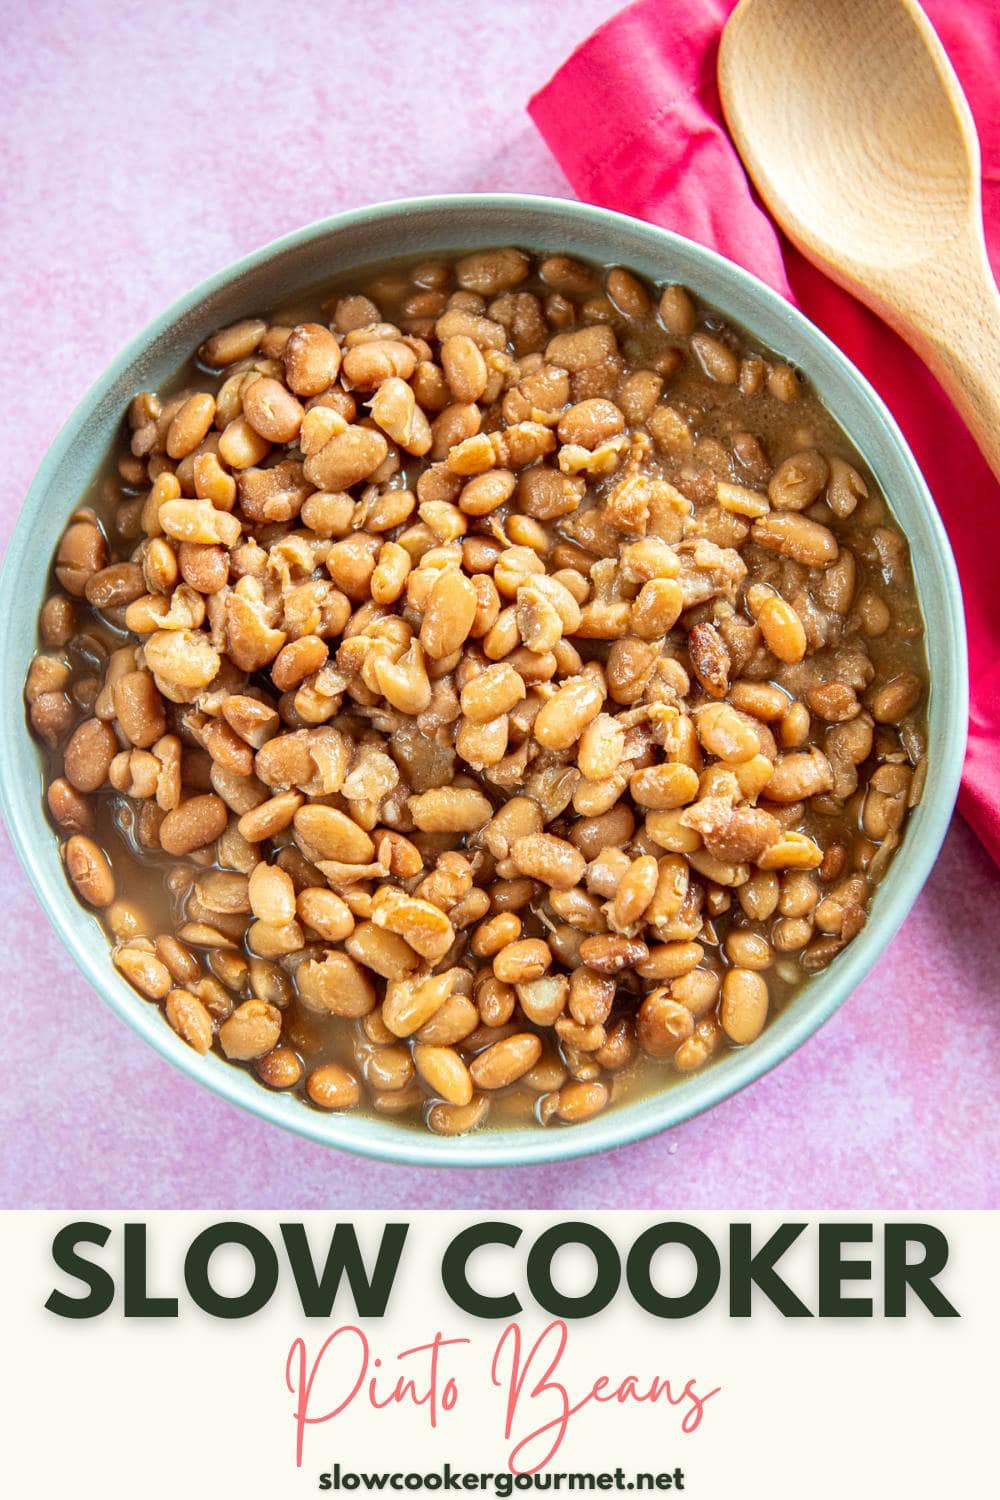 Here's Why Every Southerner Needs a Casserole-Shaped Slow Cooker